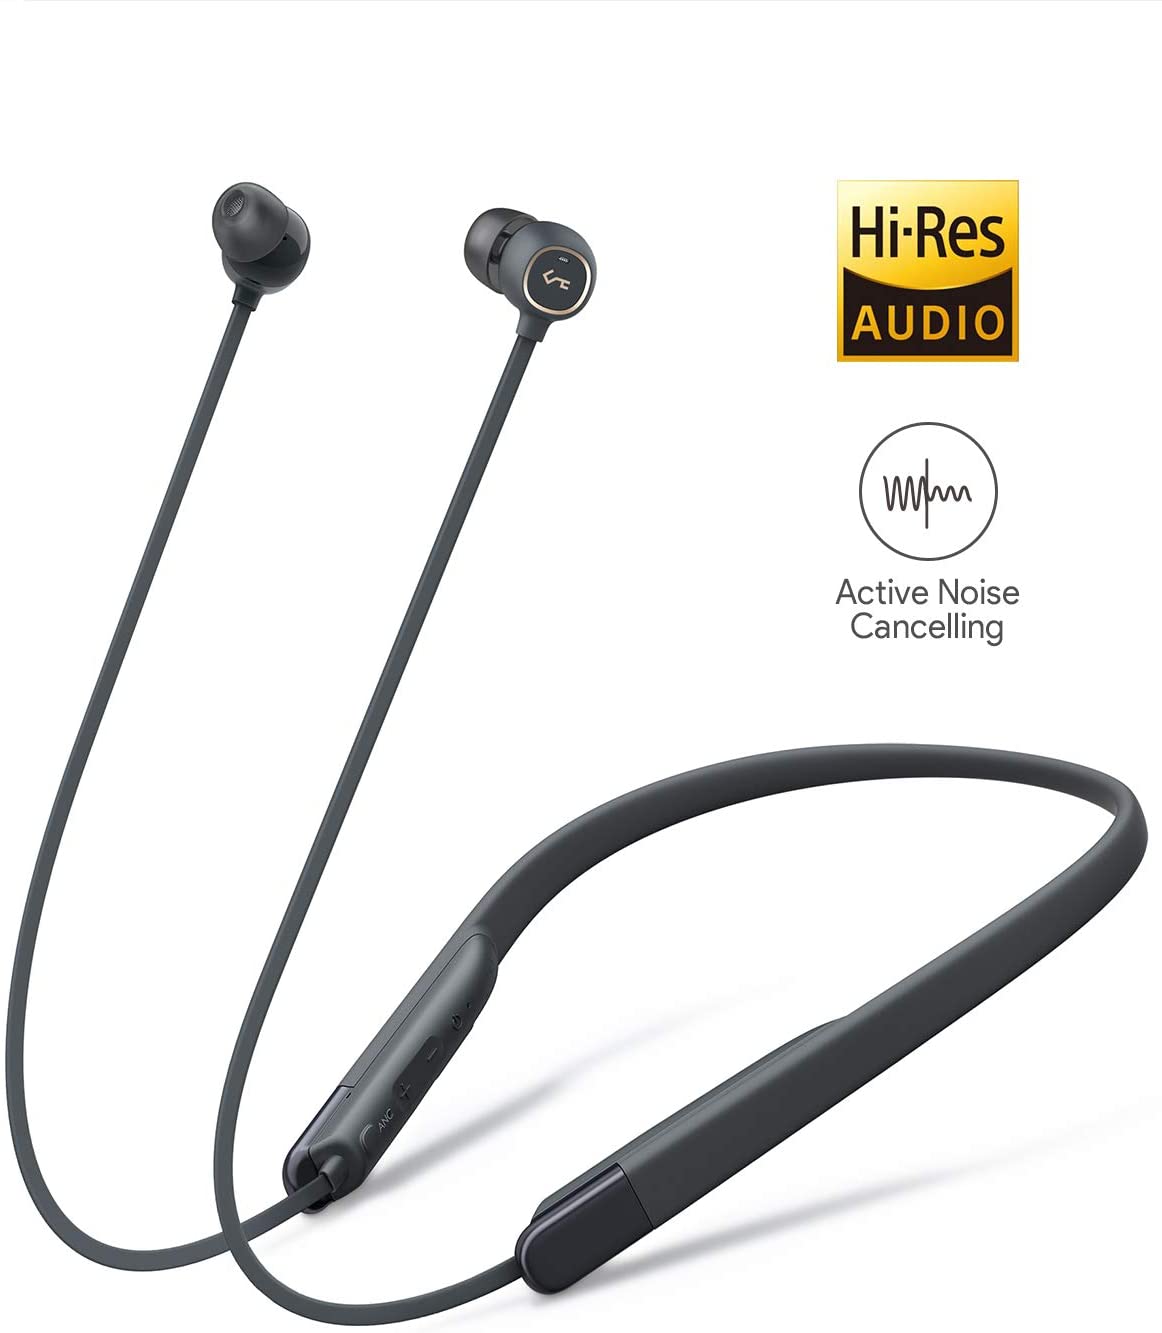 Aukey Key Series Wireless Headphones, Bluetooth 5.0, Earbuds, Active Noise Cancellation, Neckband Earphones with Dual Drivers, HiFi Stereo, IPX6 Waterproof, 8H Playtime (EP-N33 Dark Grey) - image 1 of 6